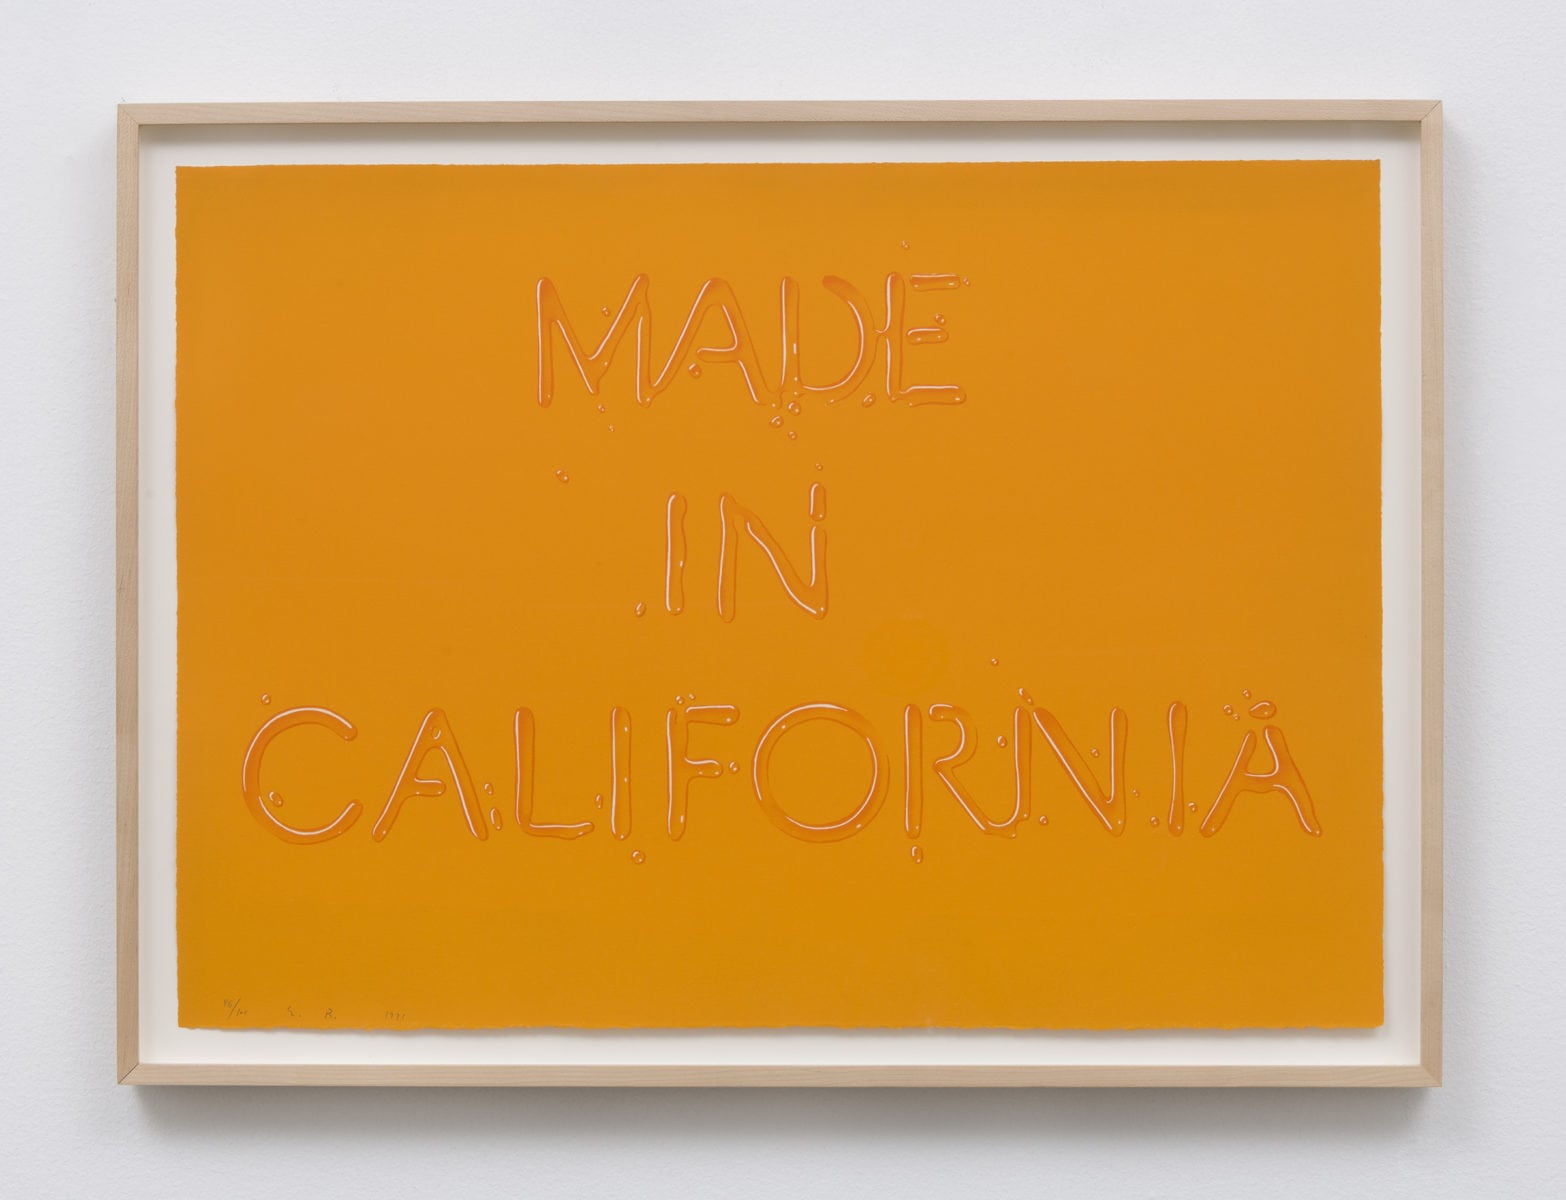 Ed Ruscha California Screenprint on white Arches paper, 20 x 28 inches Edition of 100 + 12 AP. Photo by Jeff McLane. Courtesy Honor Fraser Gallery